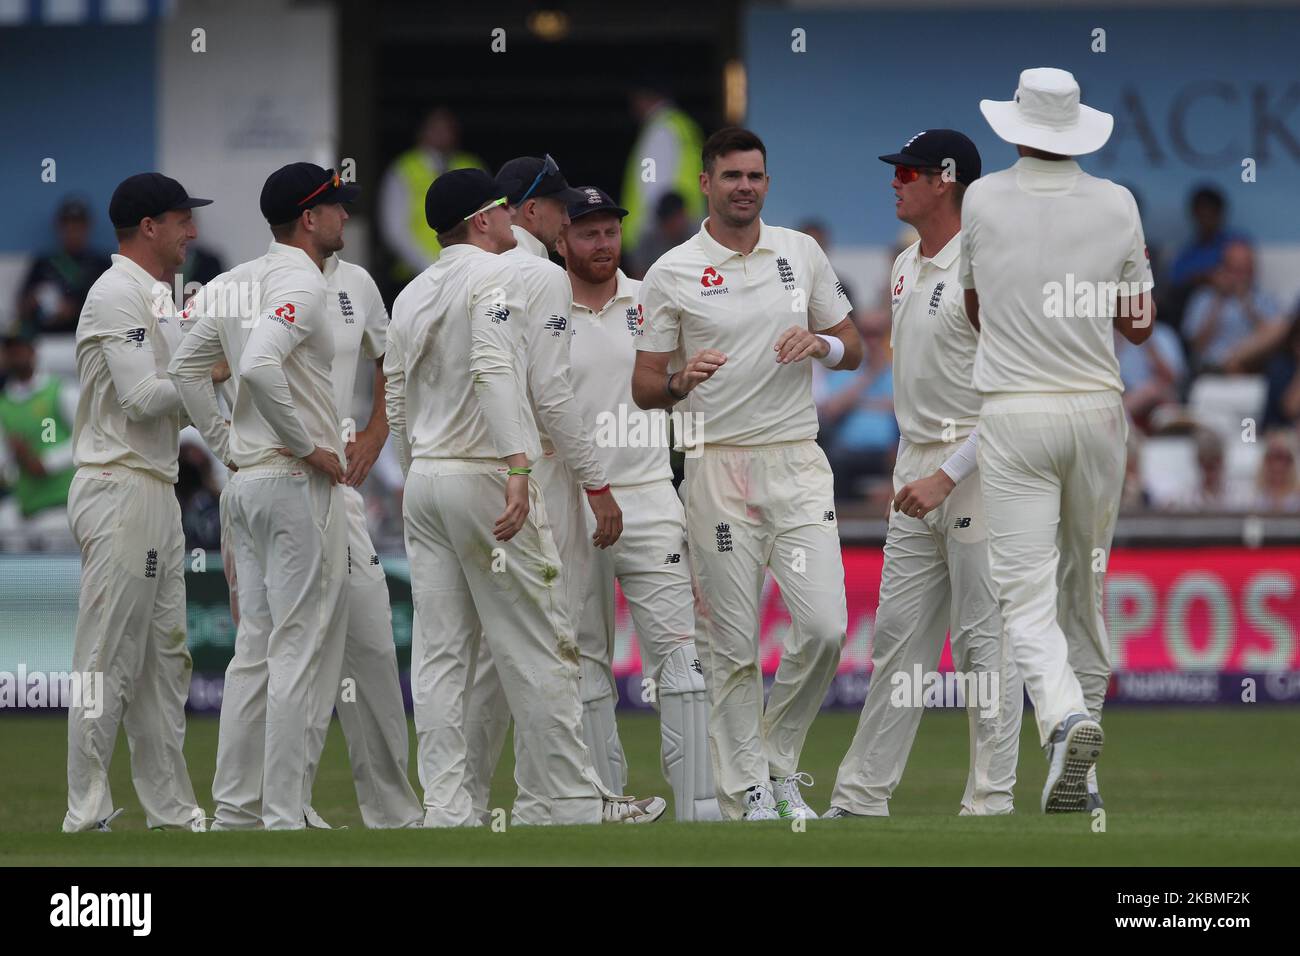 England's Jimmy Anderson celebrates with his team mates after bowling Pakistan captain Sarfraz Ahmed during the first day of the Second Nat West Test match between England and Pakistan at Headingley Cricket Ground, Leeds on Friday 1st June 2018. (Photo by Mark Fletcher/MI News/NurPhoto) Stock Photo